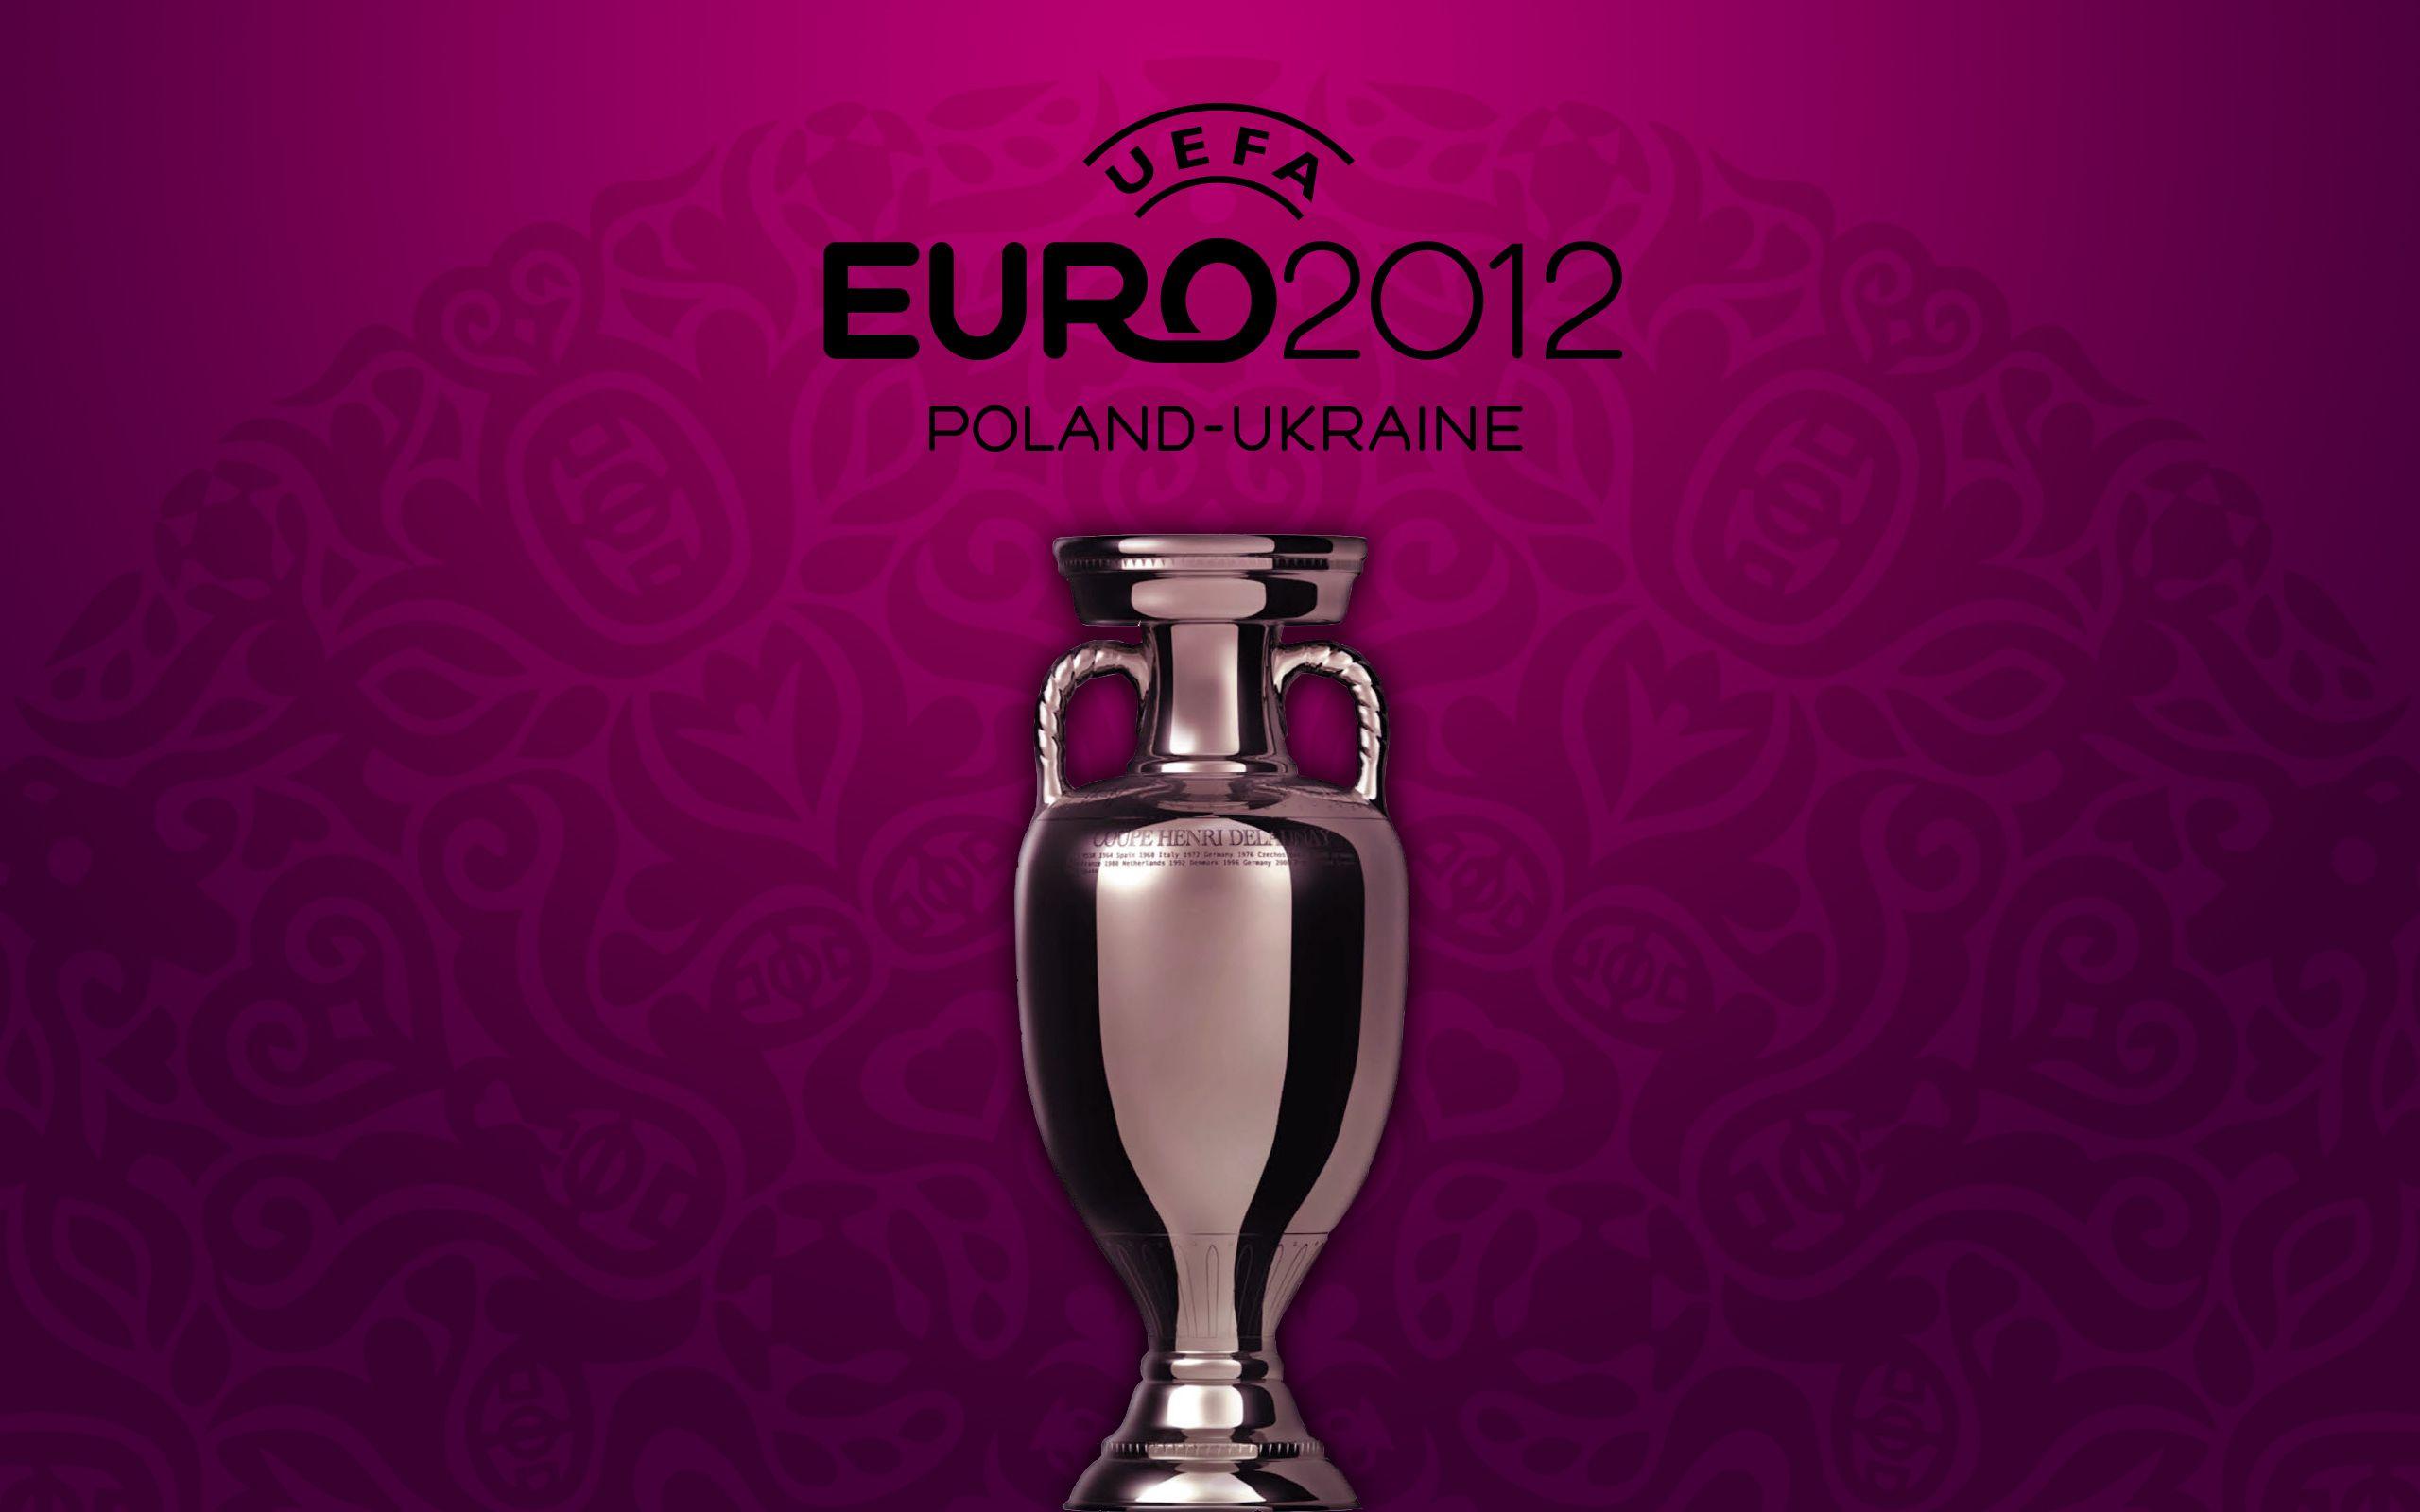 Uefa Euro 2012 Trophy and Cup. All Size Wallpaper